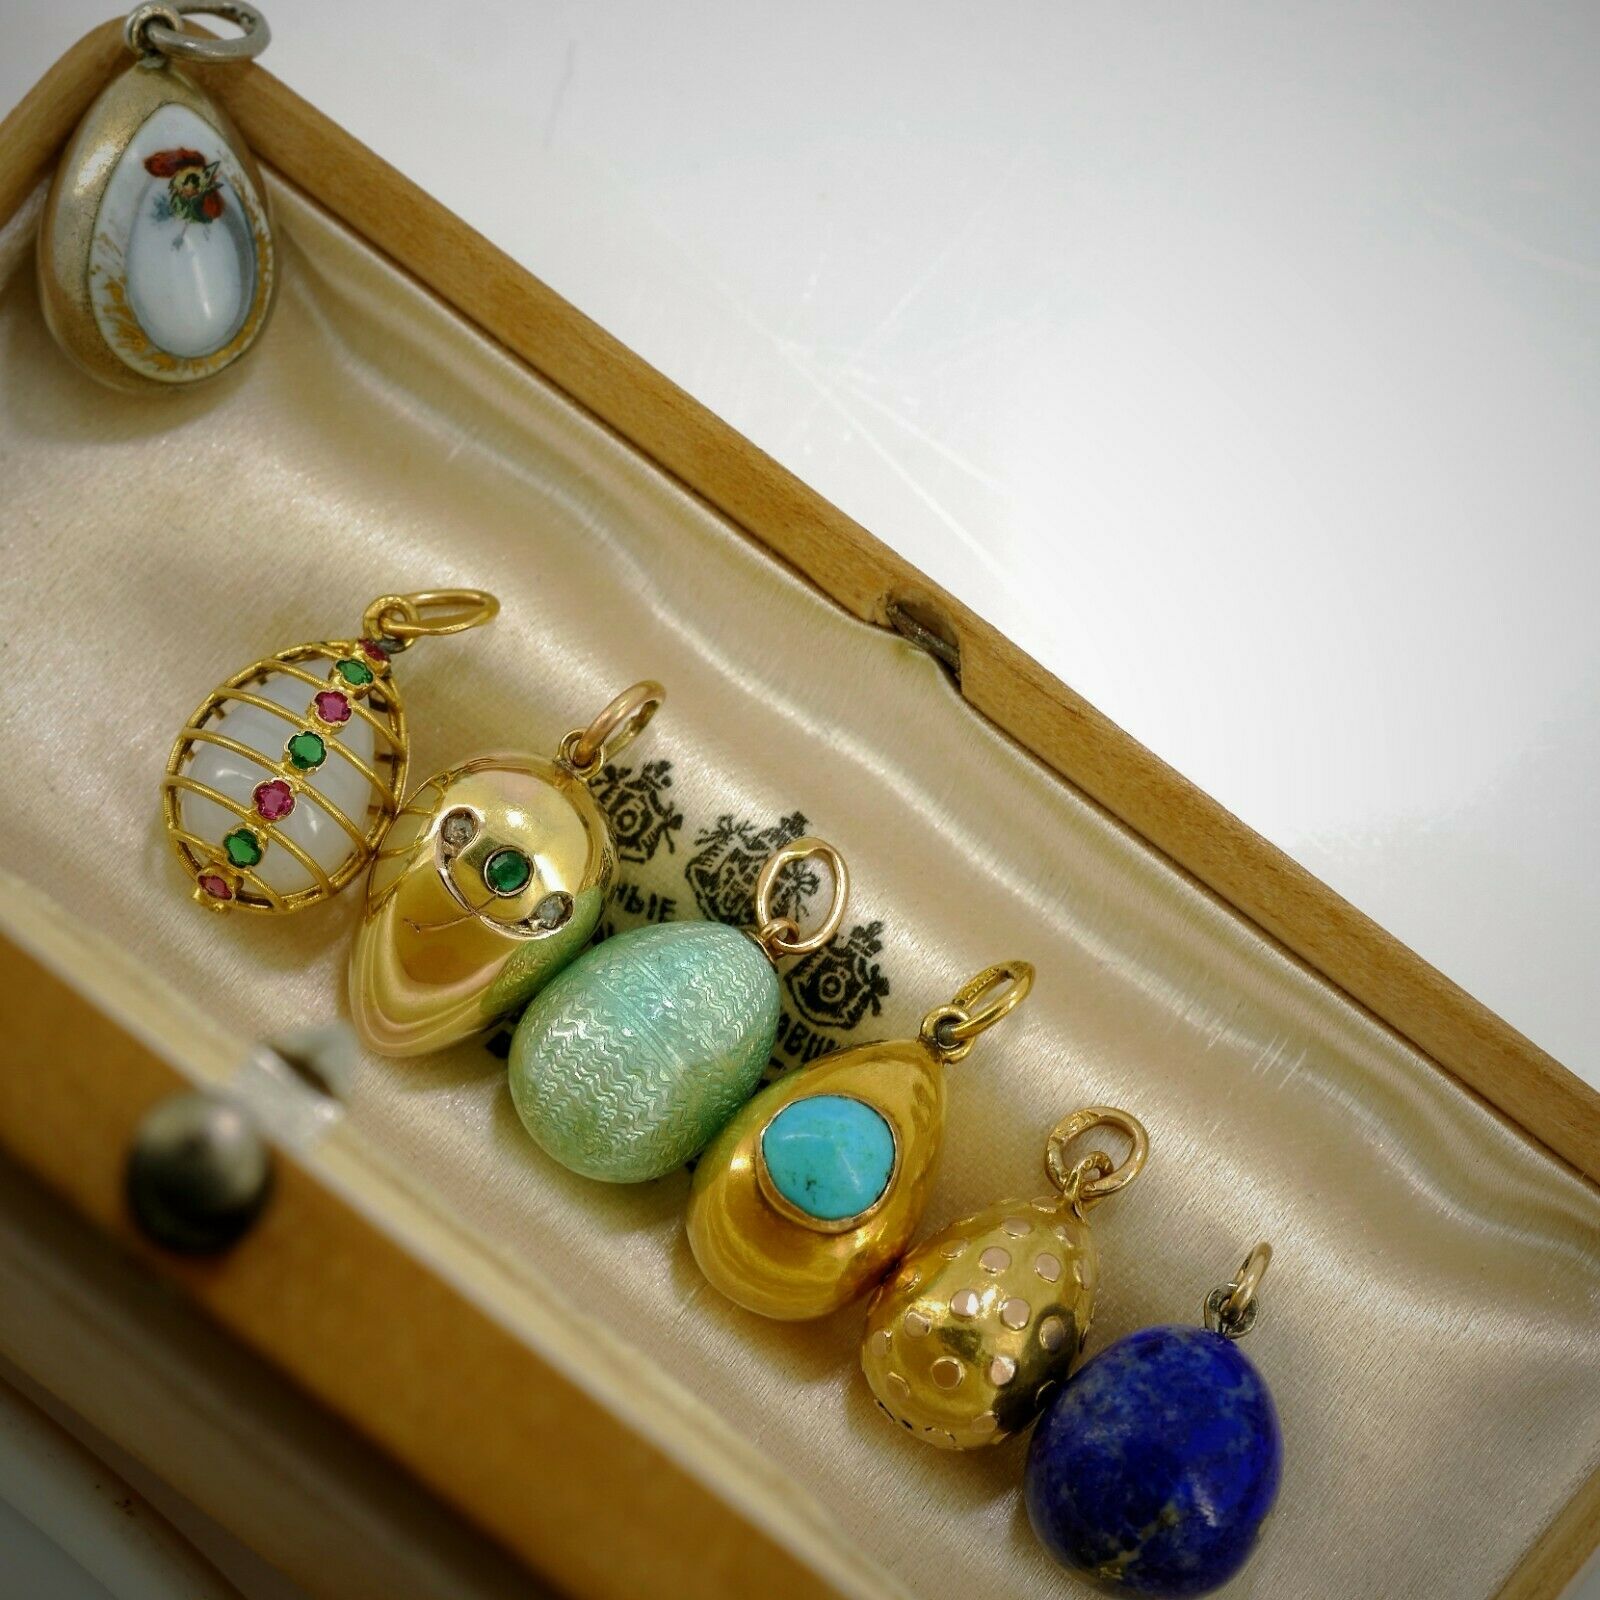 Antique Russian Gold Egg - Each Egg Is Sold Individually, Circa 1899-1917